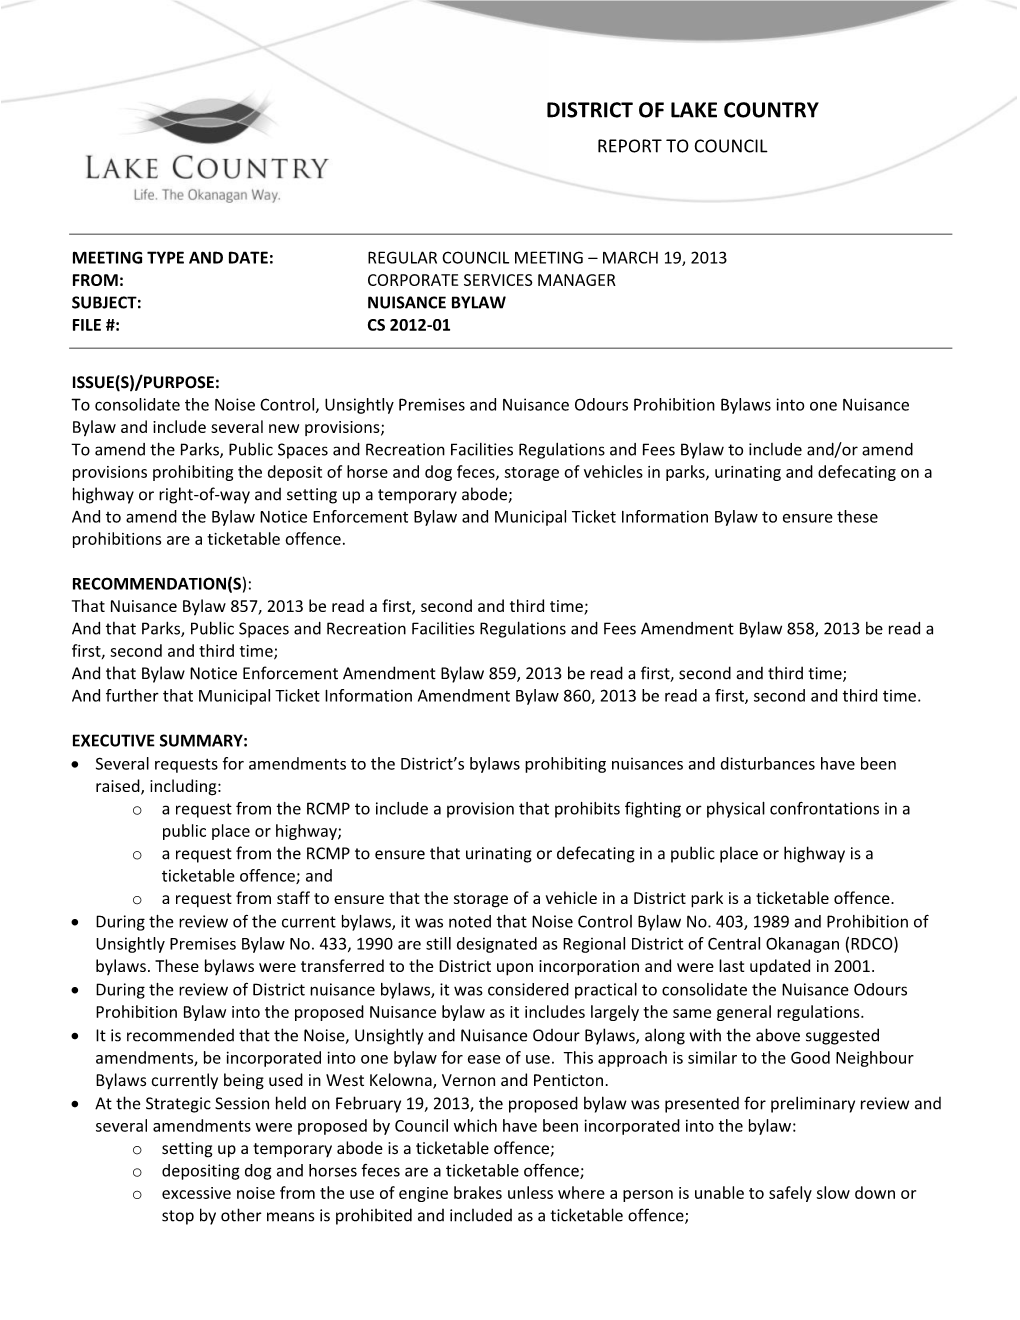 District of Lake Country Report to Council